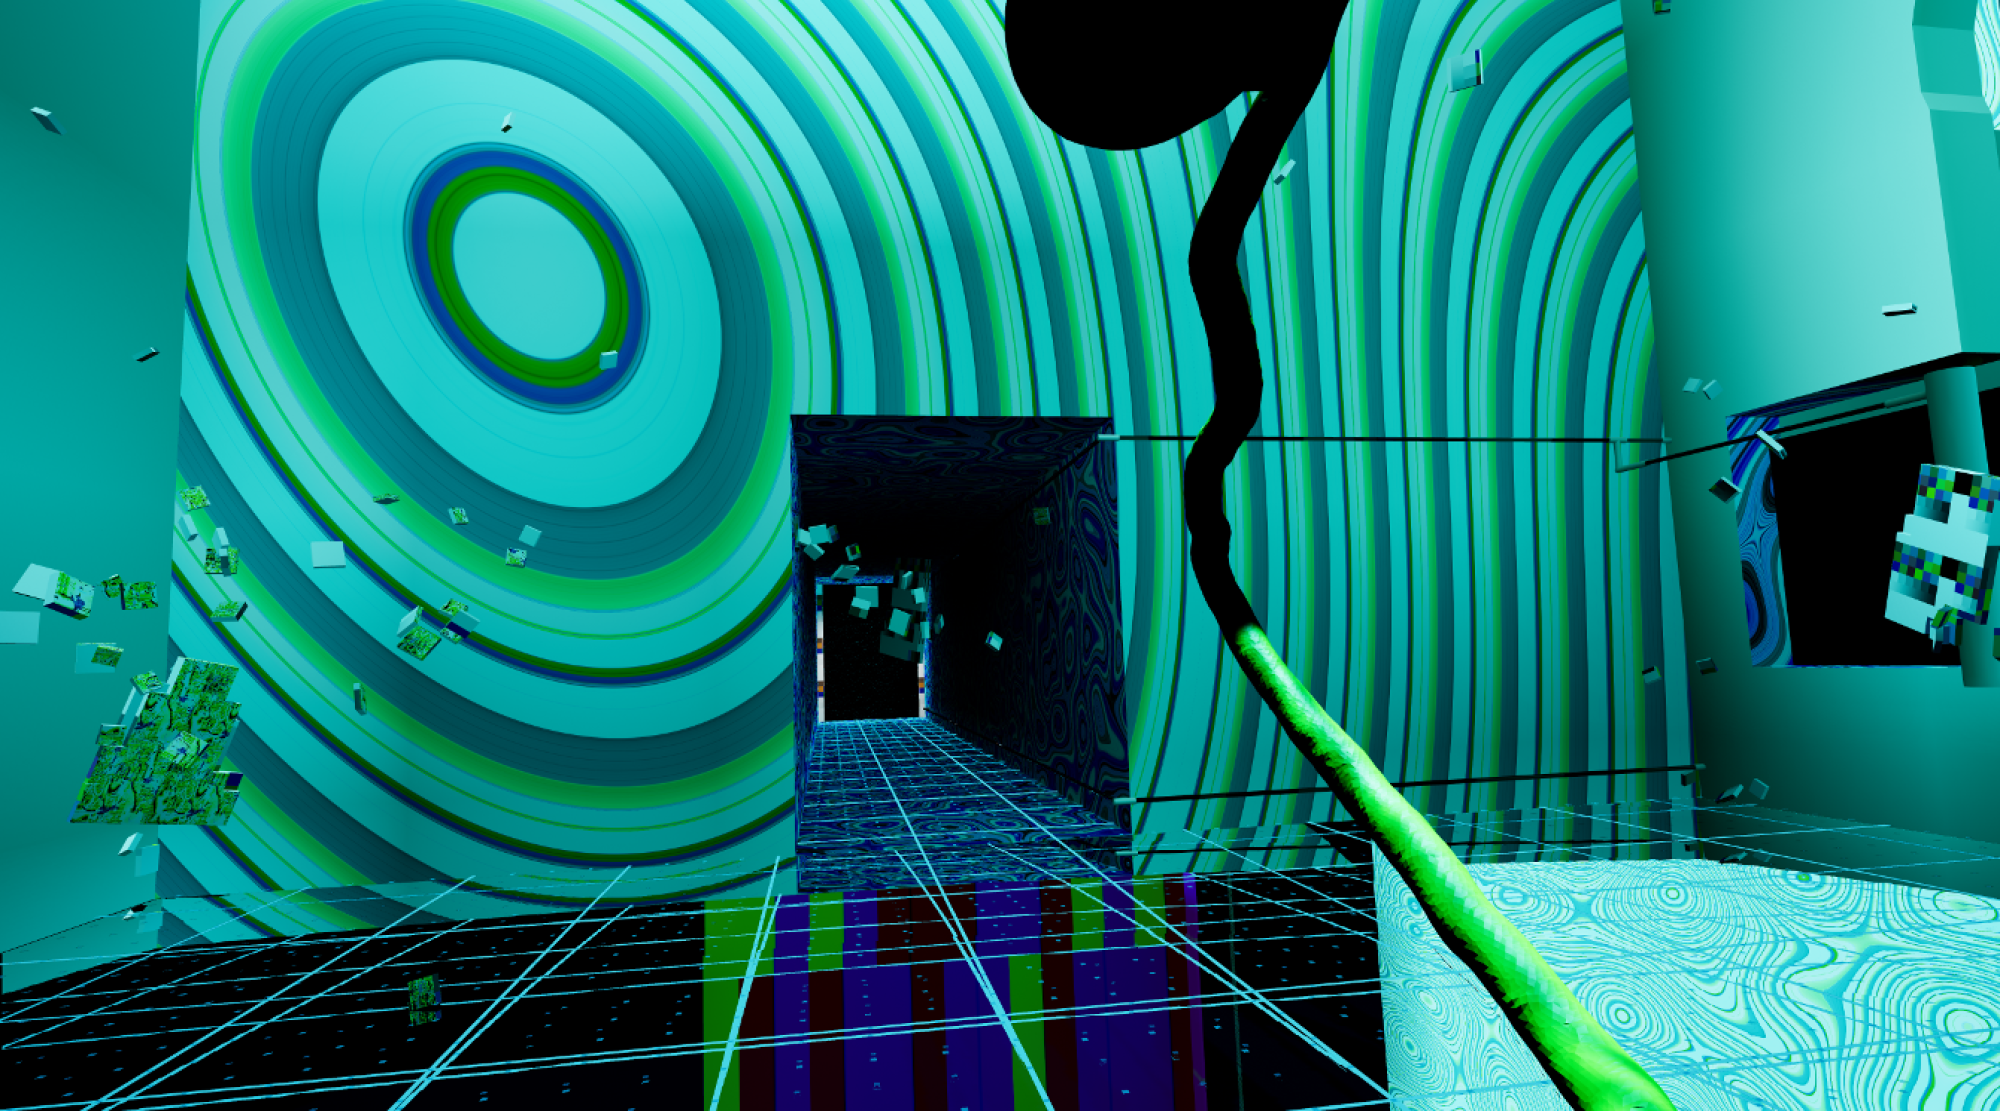 A still from artist Keith Tolch's interactive, virtual reality artwork, 